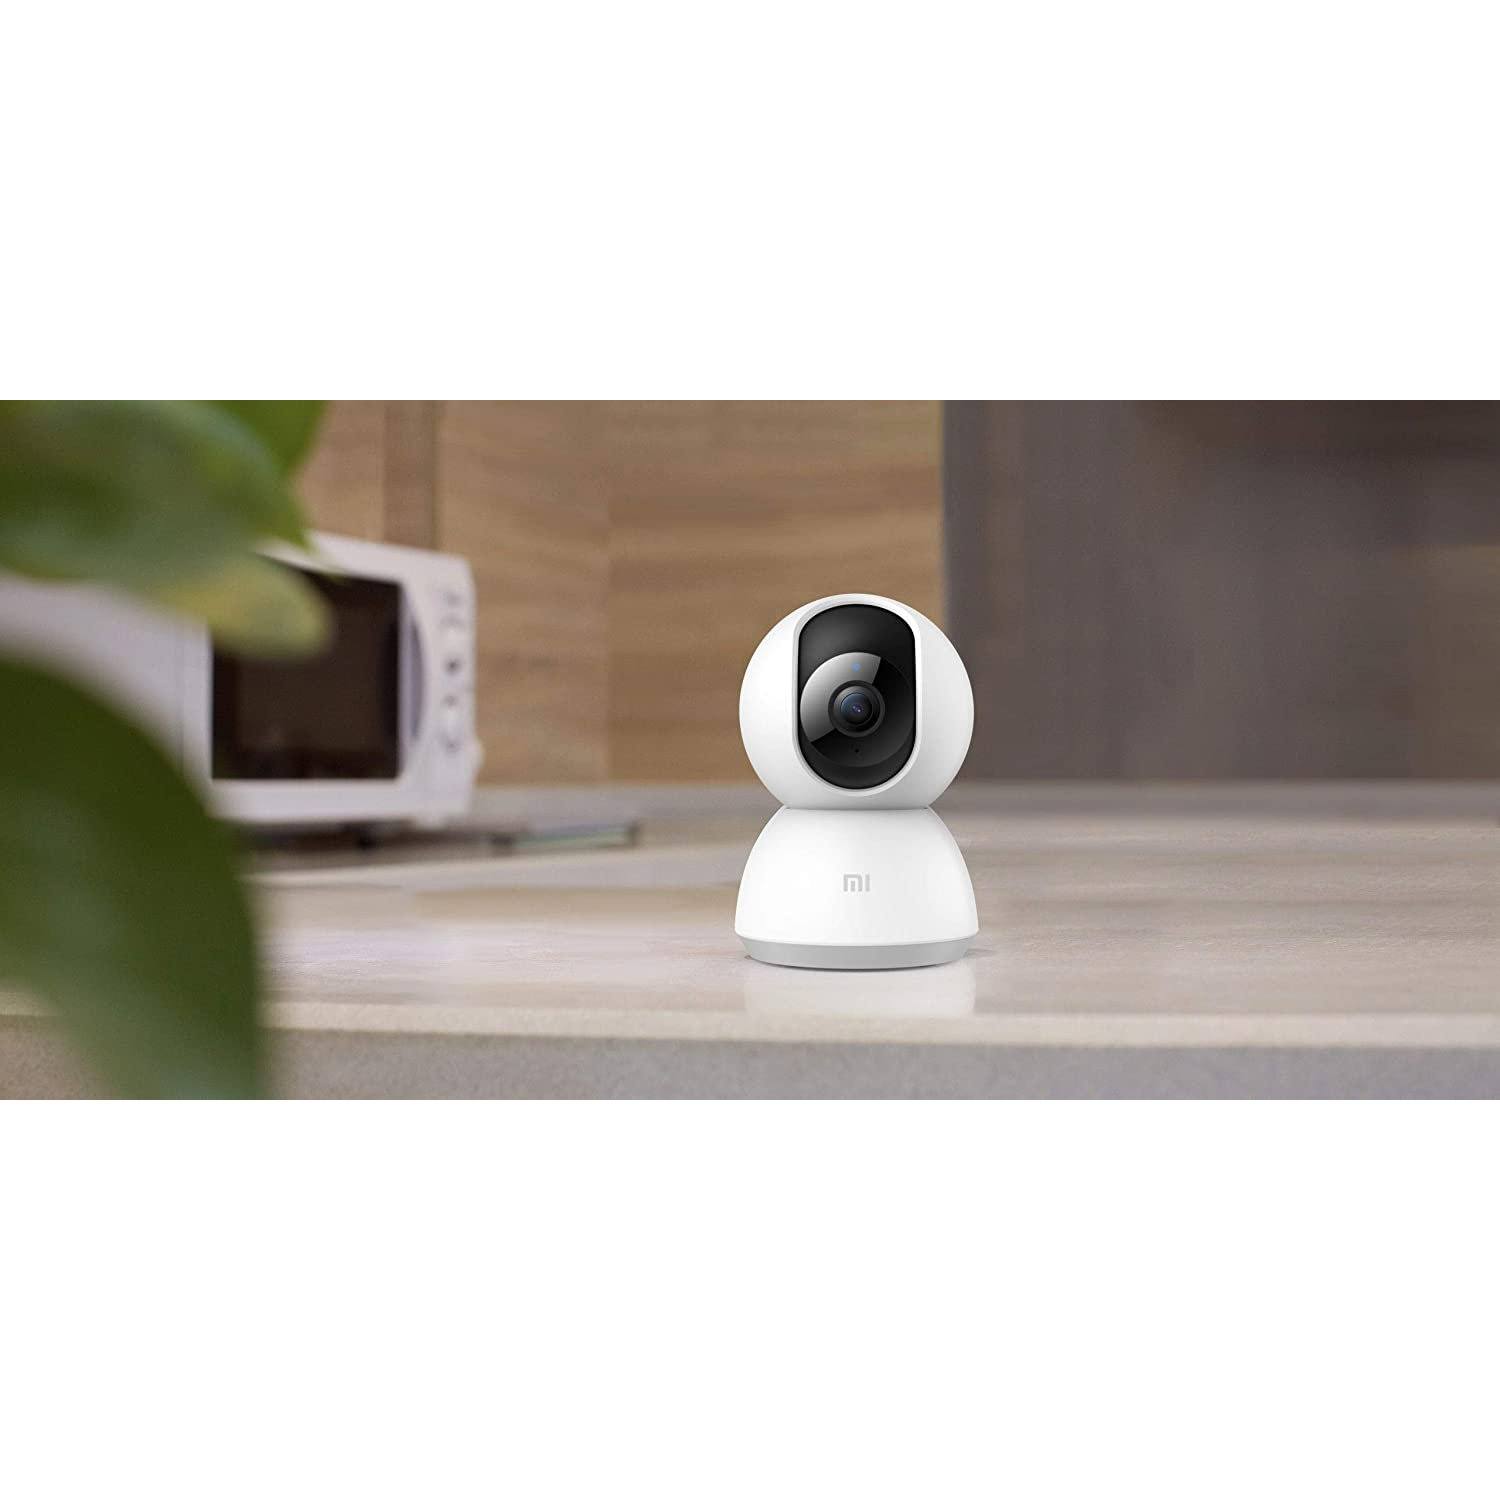 Xiaomi Mijia PTZ 2K Home Security Camera 360° CCTV 1080P Full HD with Infrared Night Funsion, White Default Xiaomi 